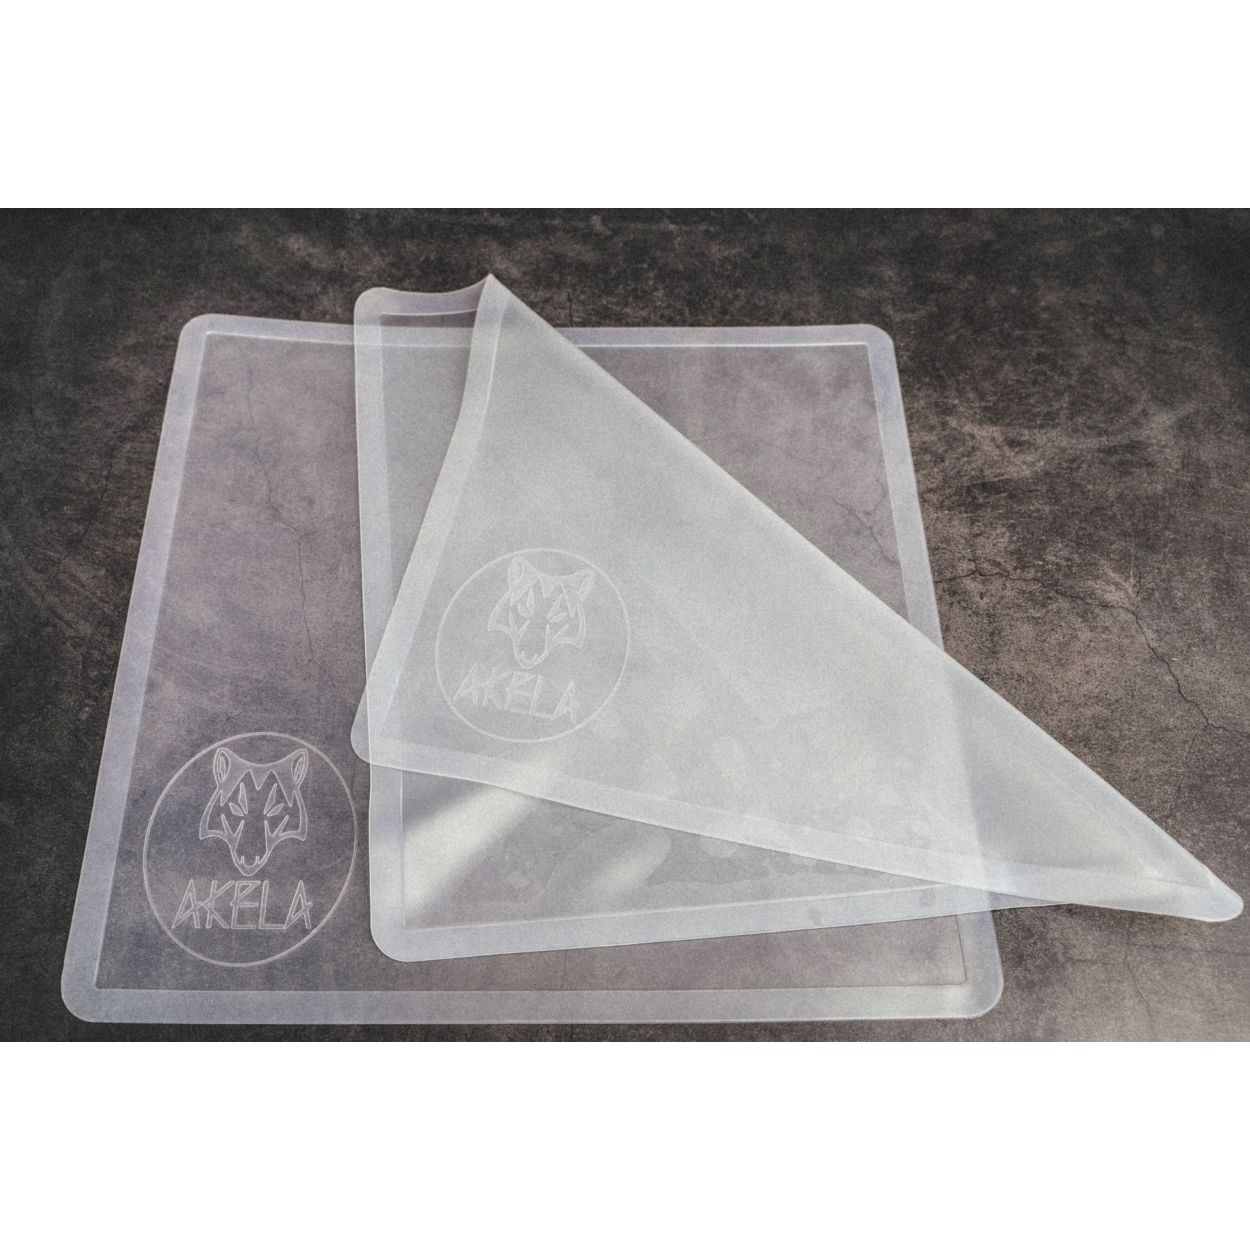 Dehydrator Sheets - by Akela - for Excalibur Dehydrators - Silicone  Non-Stick Drying & Baking Sheets - Pack of 3